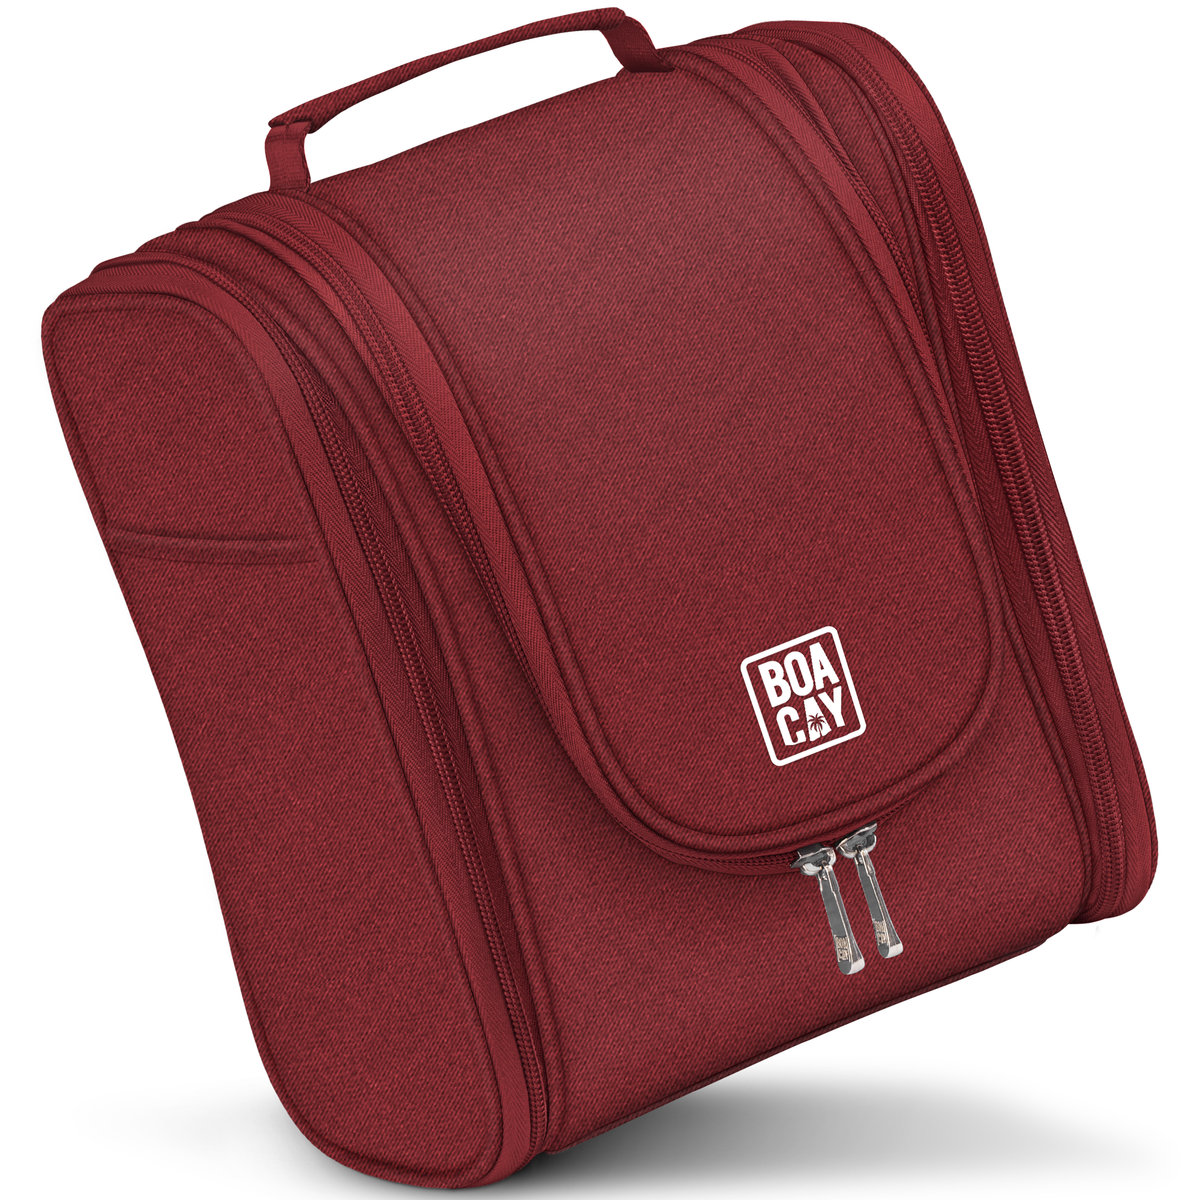 Medium Collapsible Hanging Toiletry Bag - Wine Red